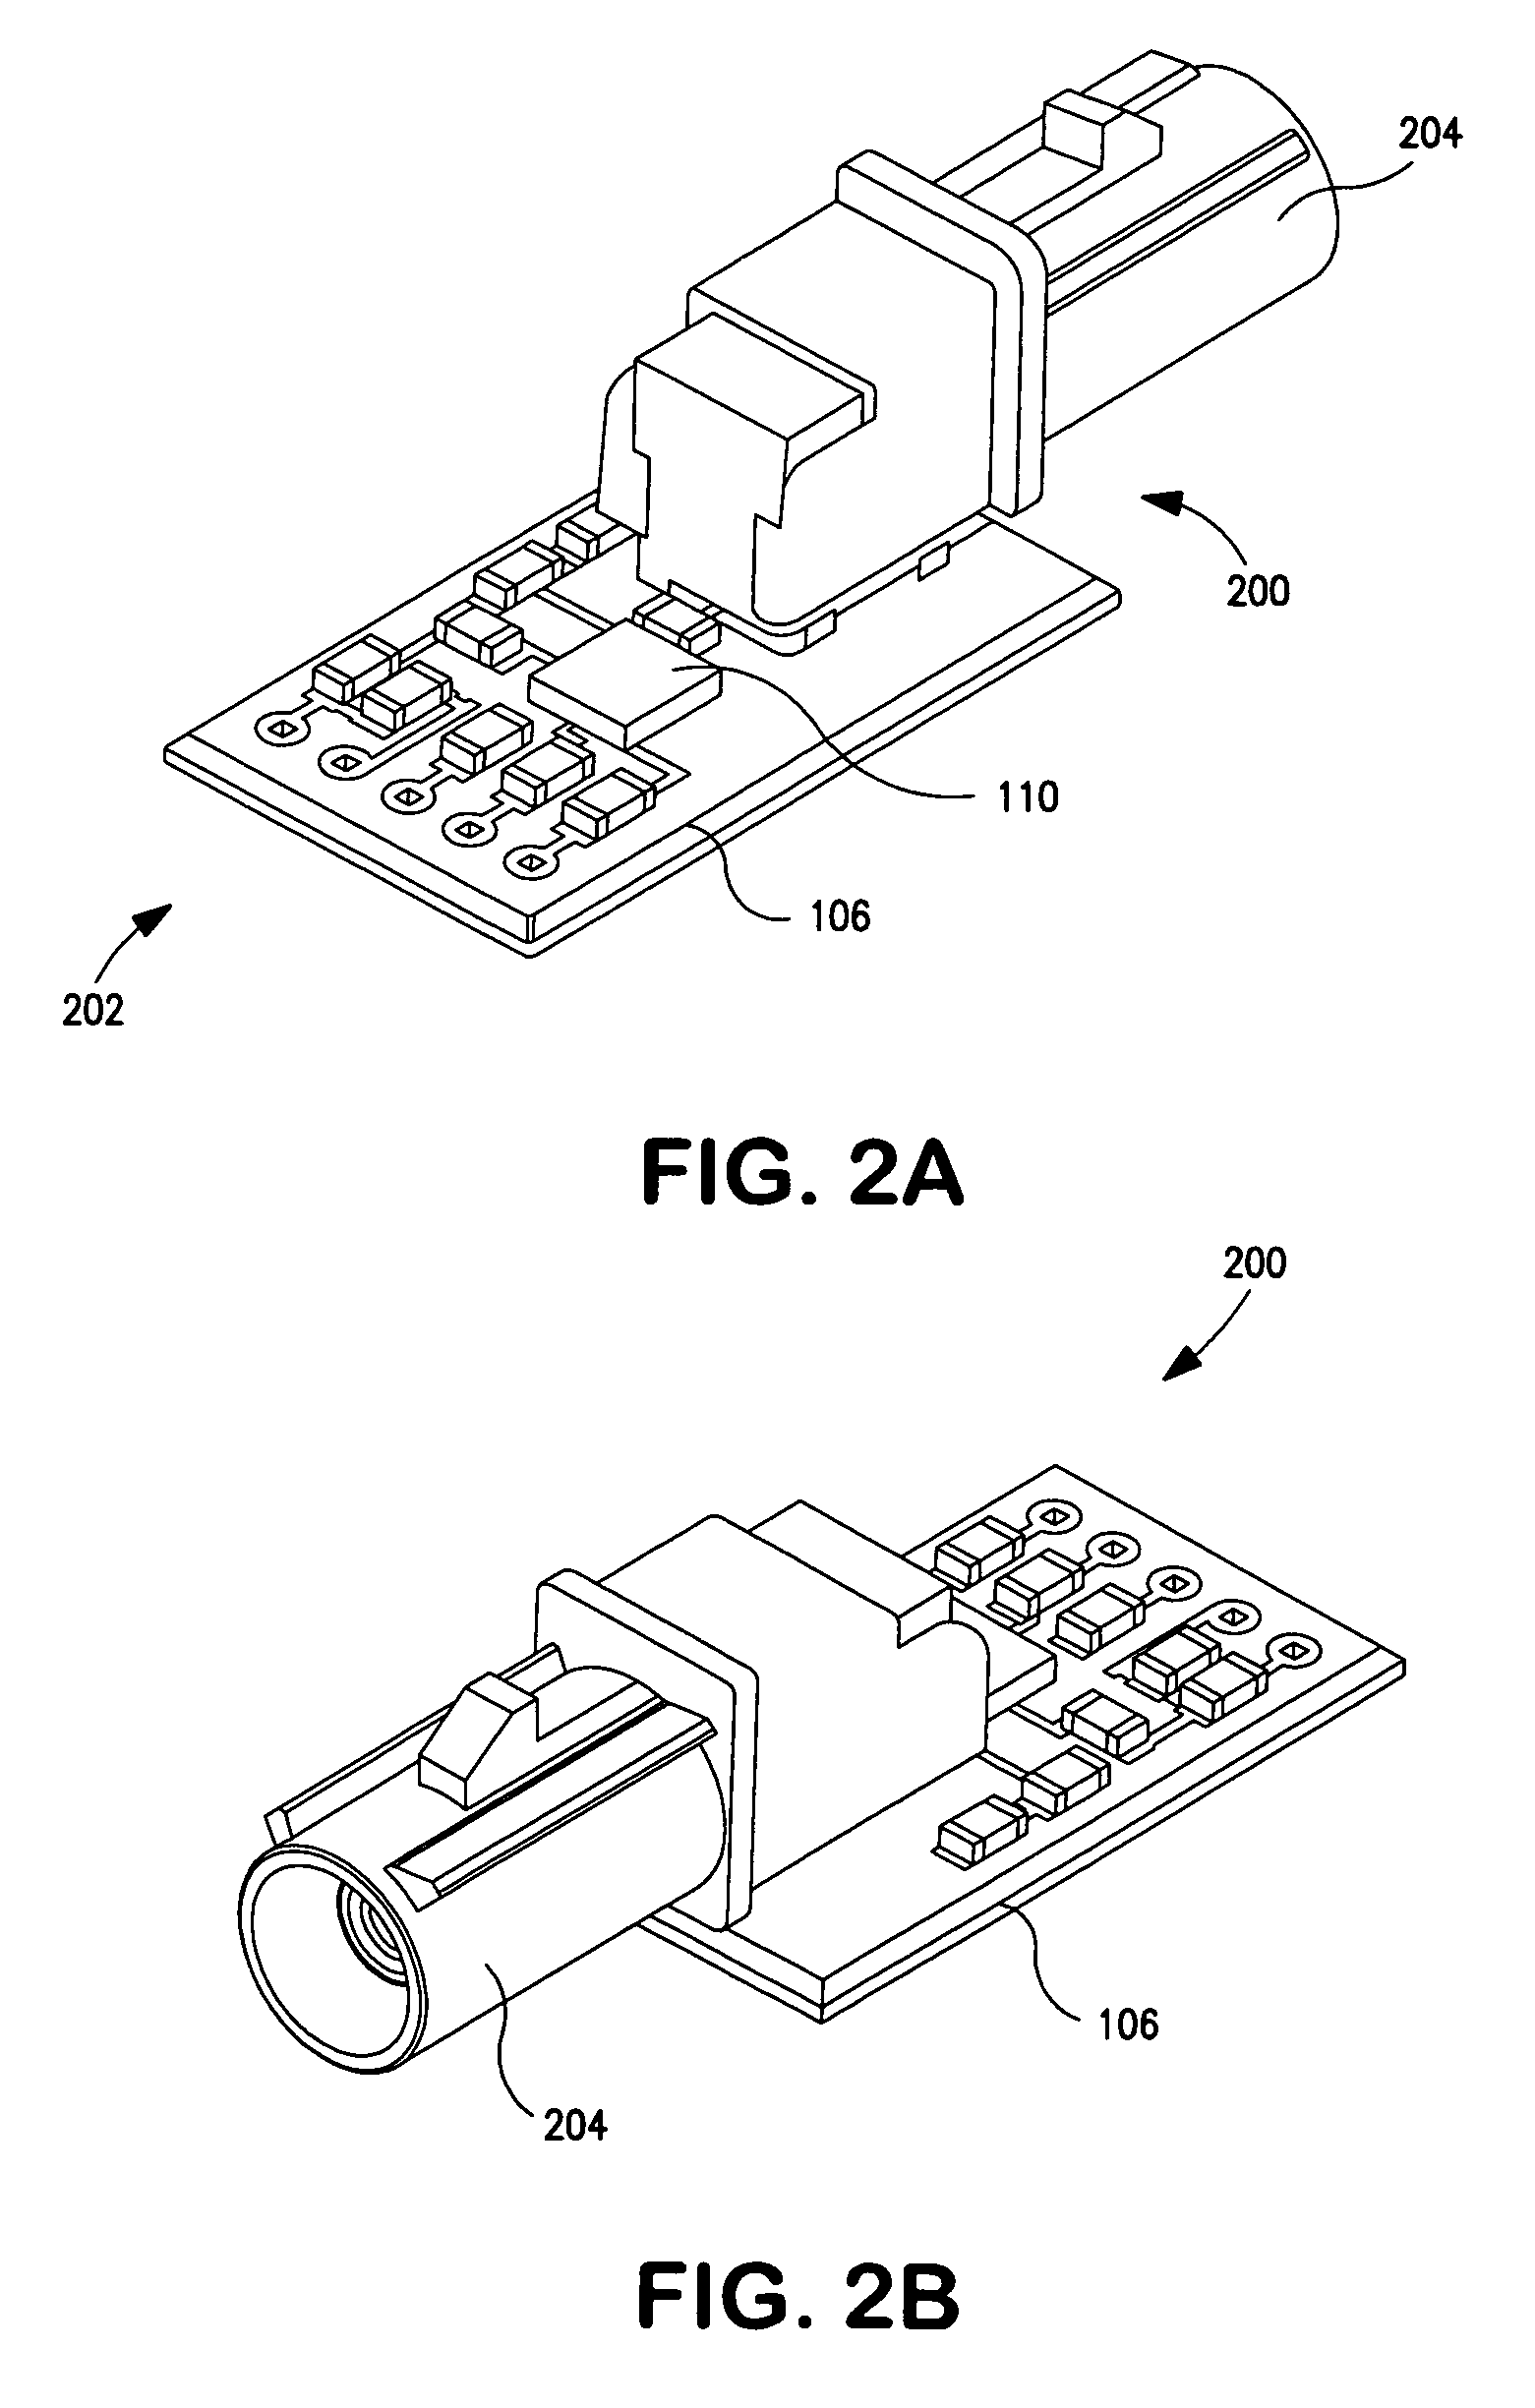 Low-cost connector apparatus and methods for use in high-speed data applications